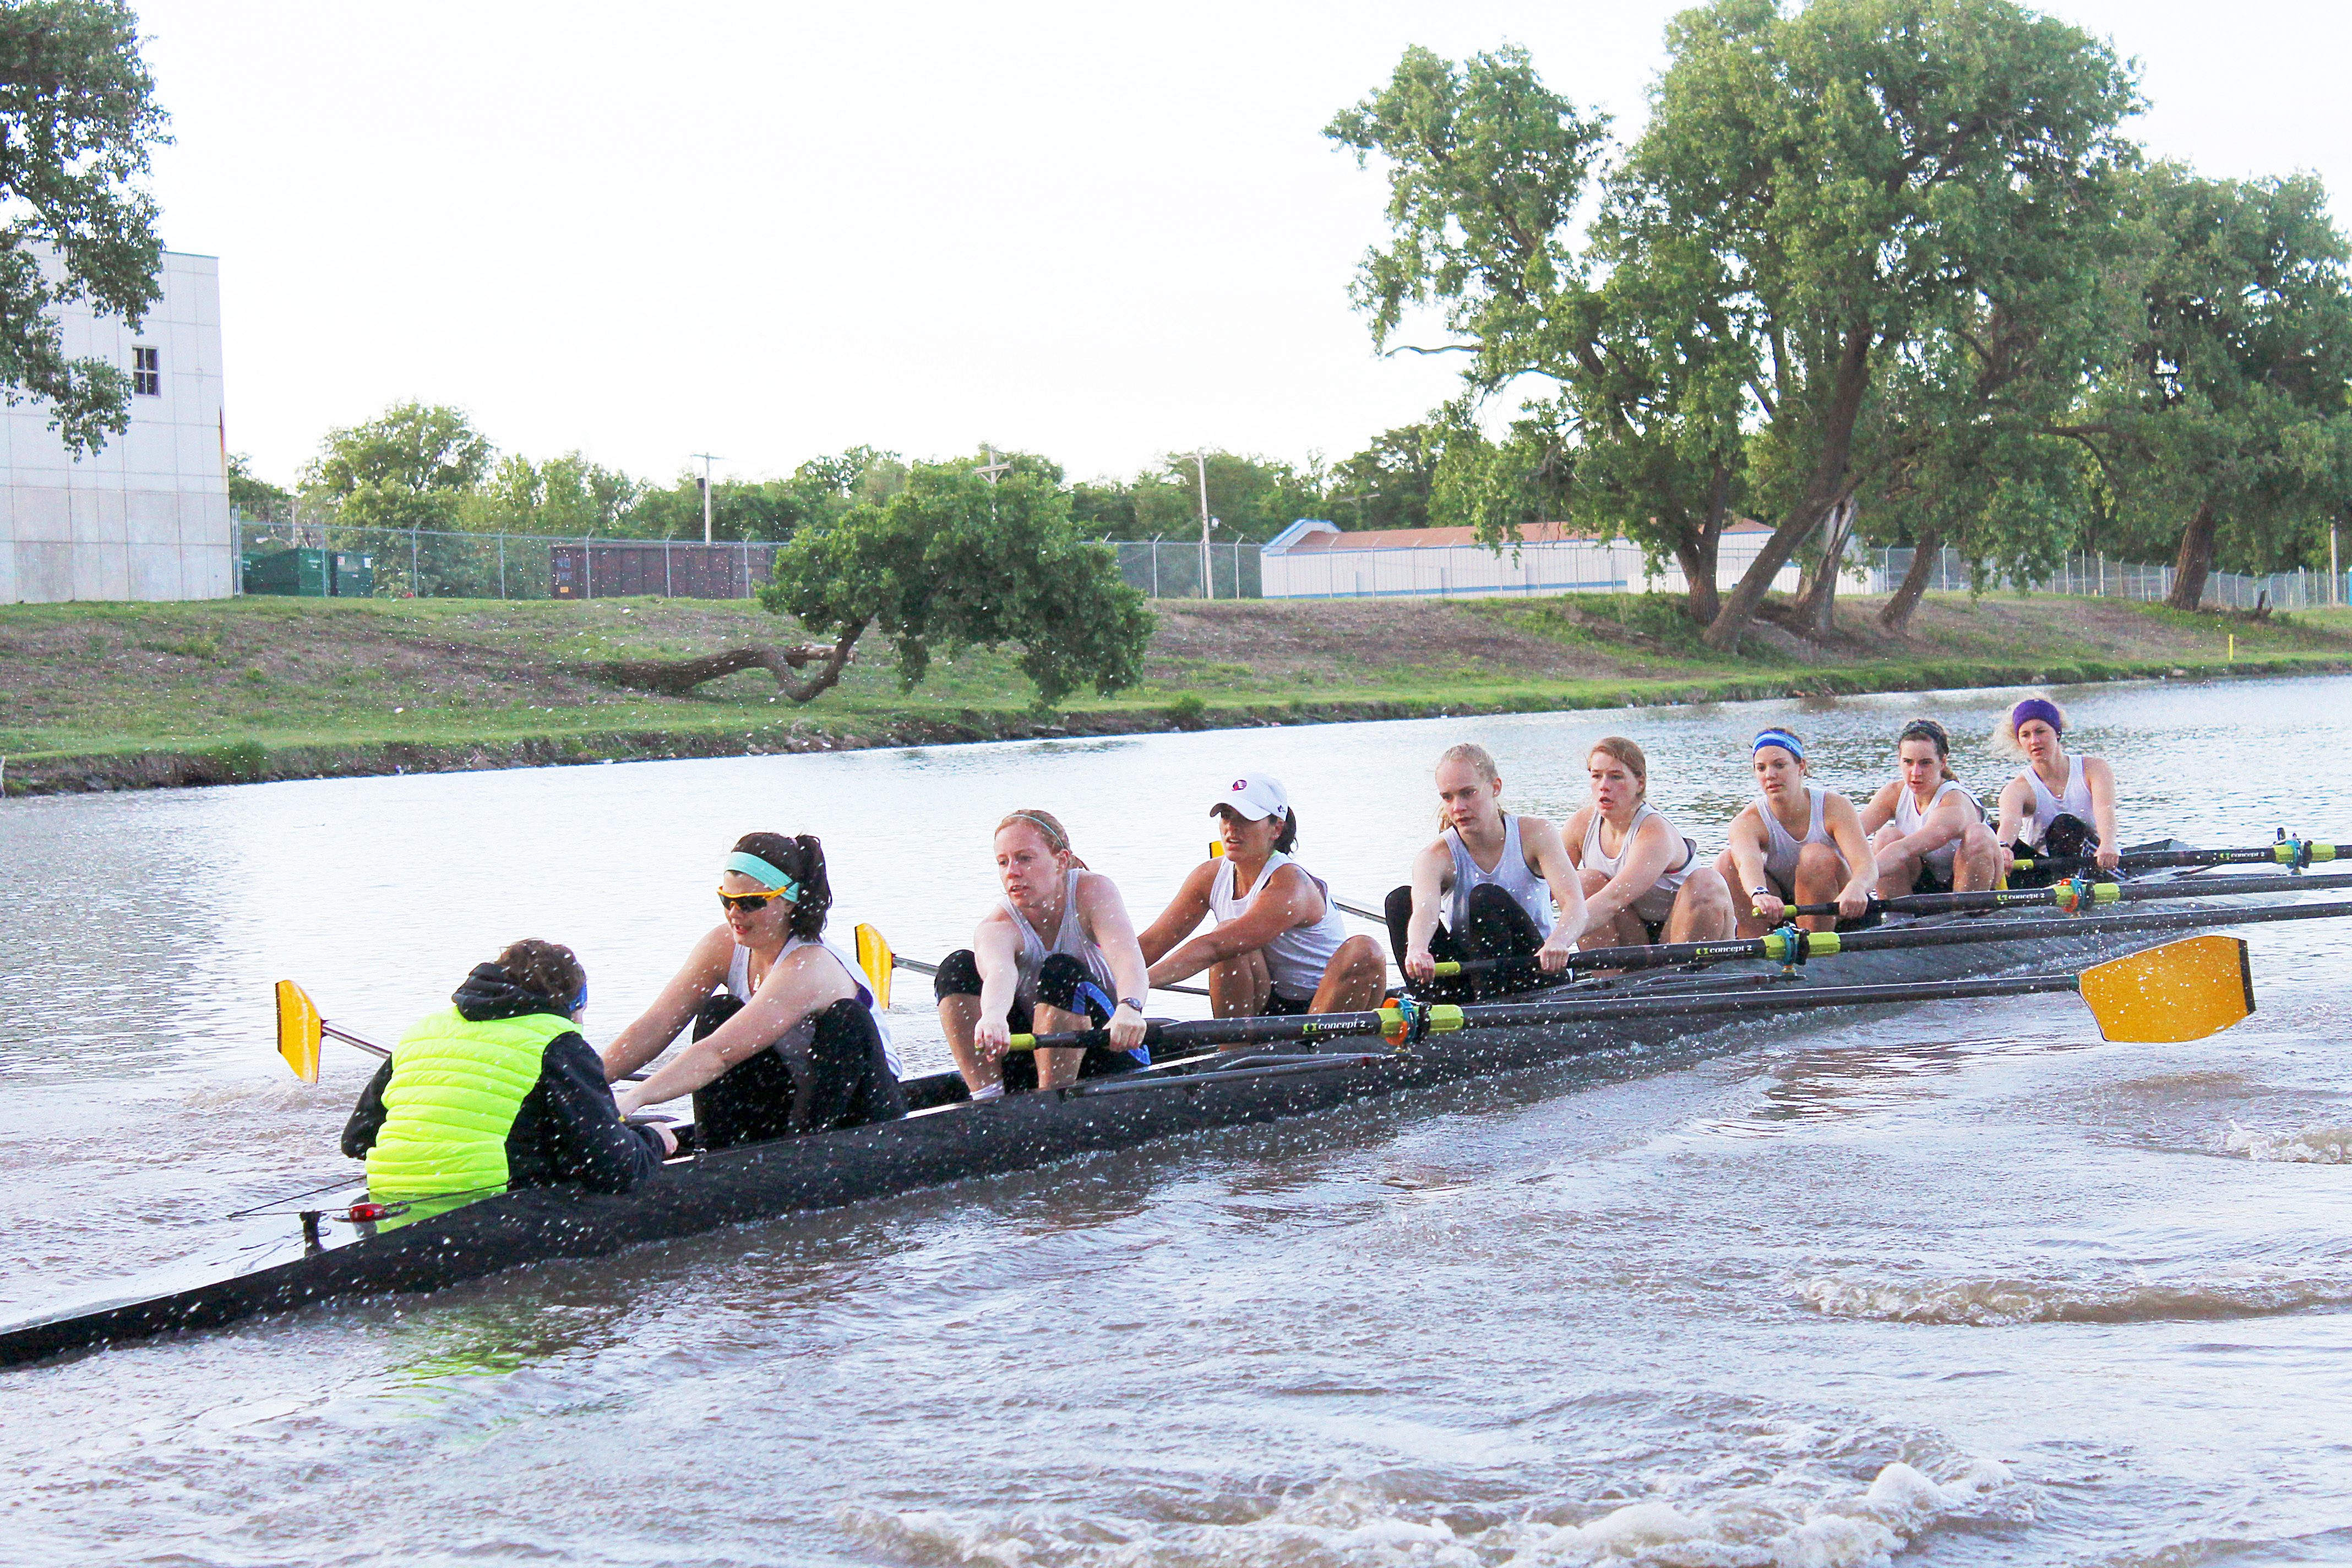 Women's eight rowing down the river. They are working hard. The rowers face us, the coxswain faces away.